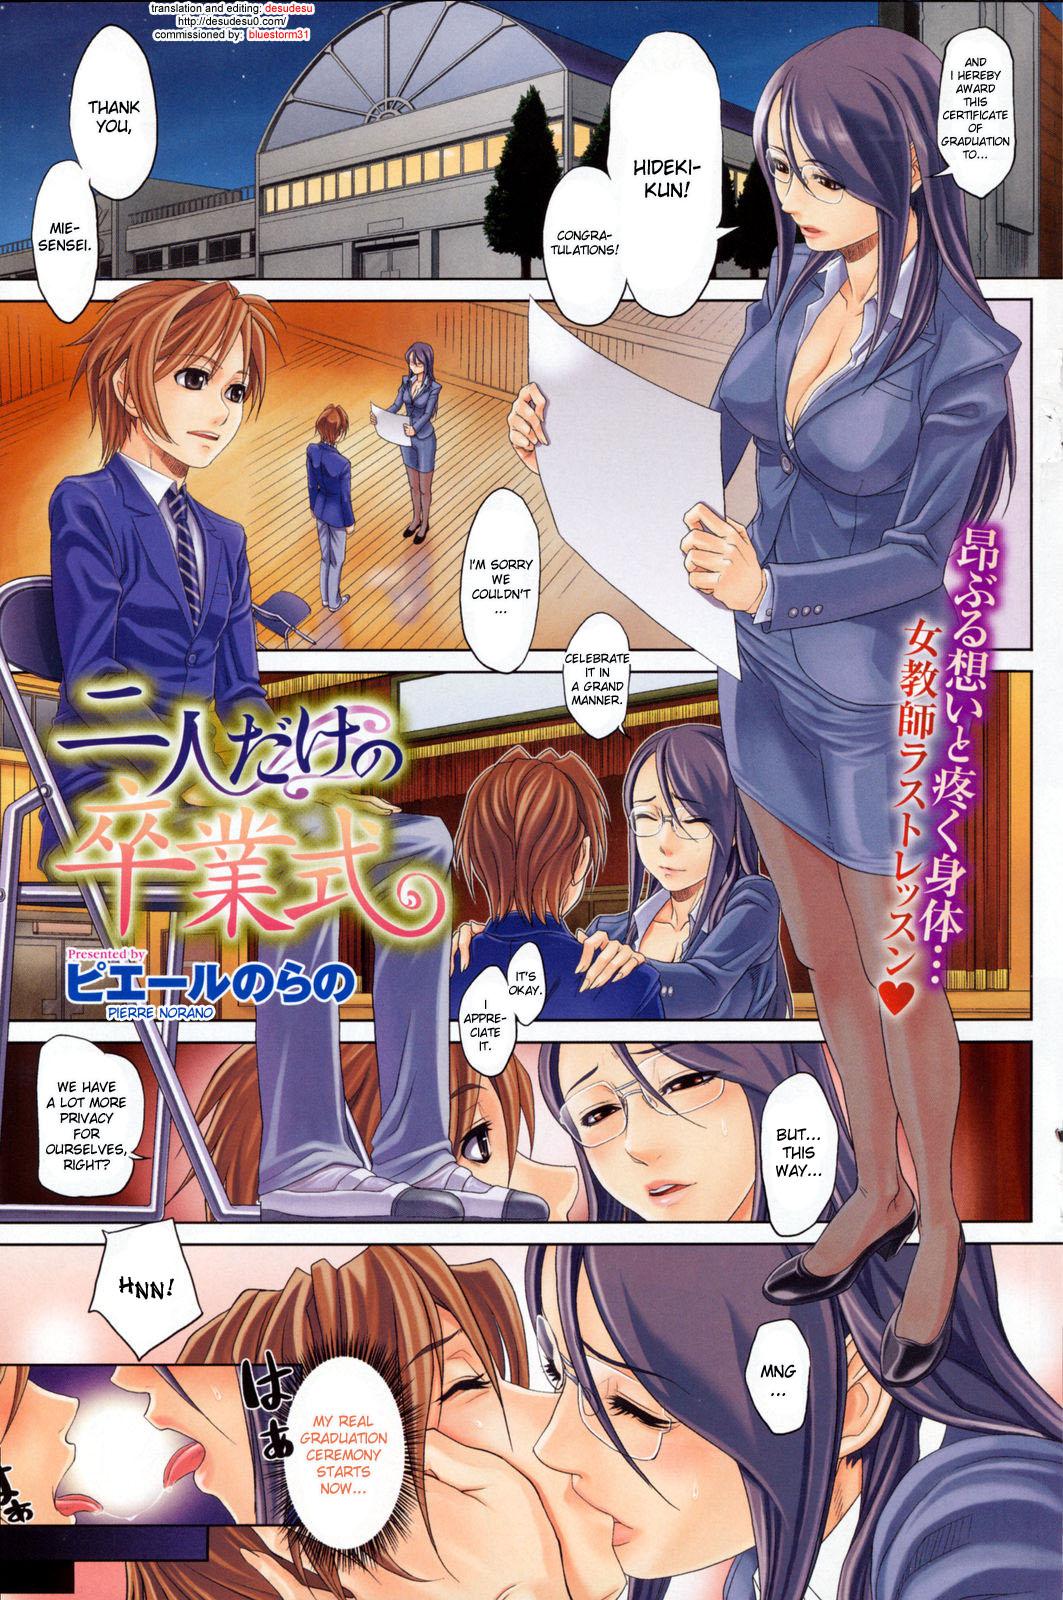 Futari Dake no Sotsugyoushiki | A Graduation Ceremony Just for the Two of Us 1